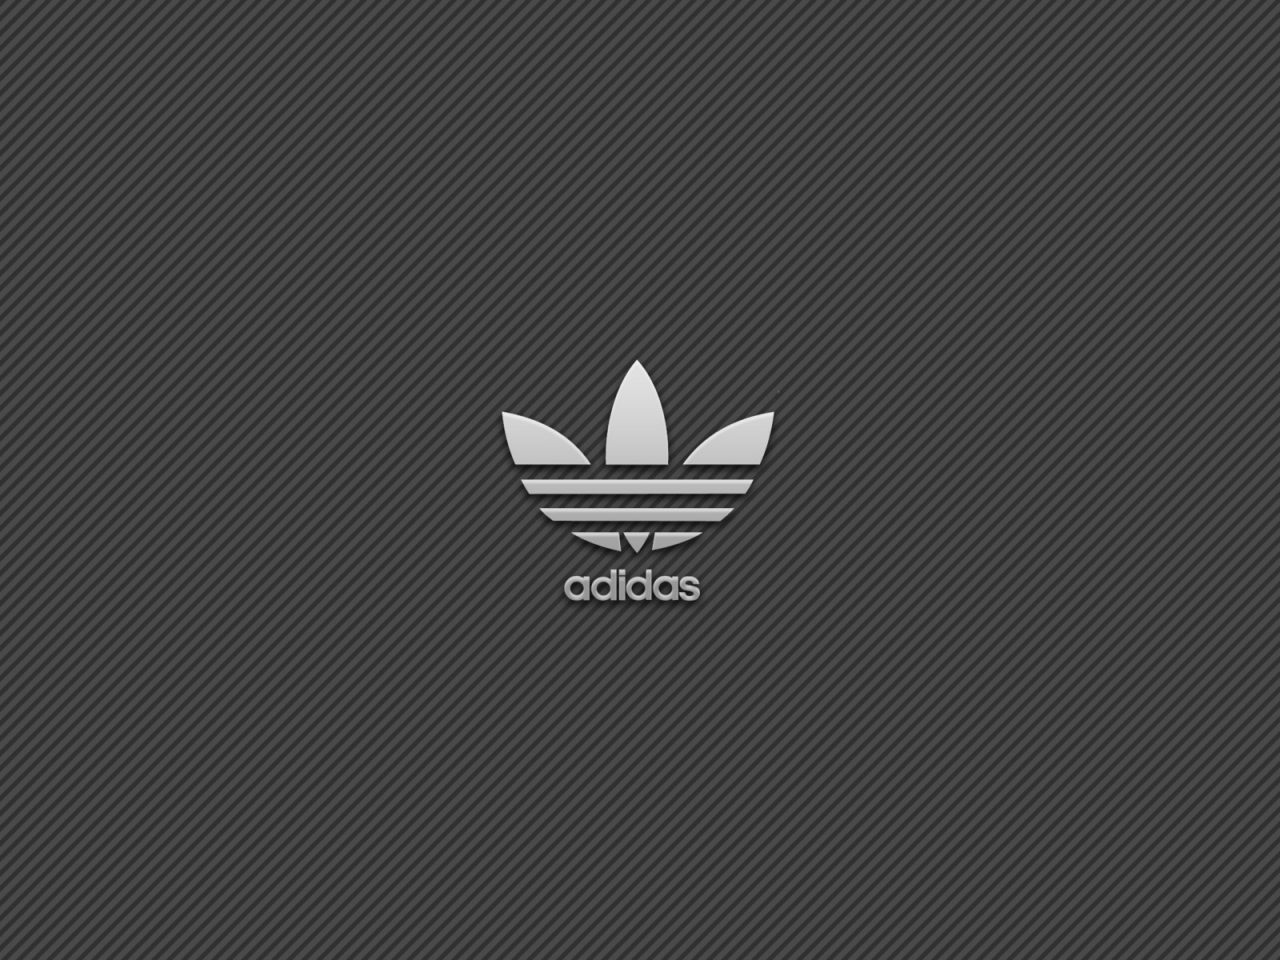 Adidas Simple Logo Background for 1280 x 960 resolution